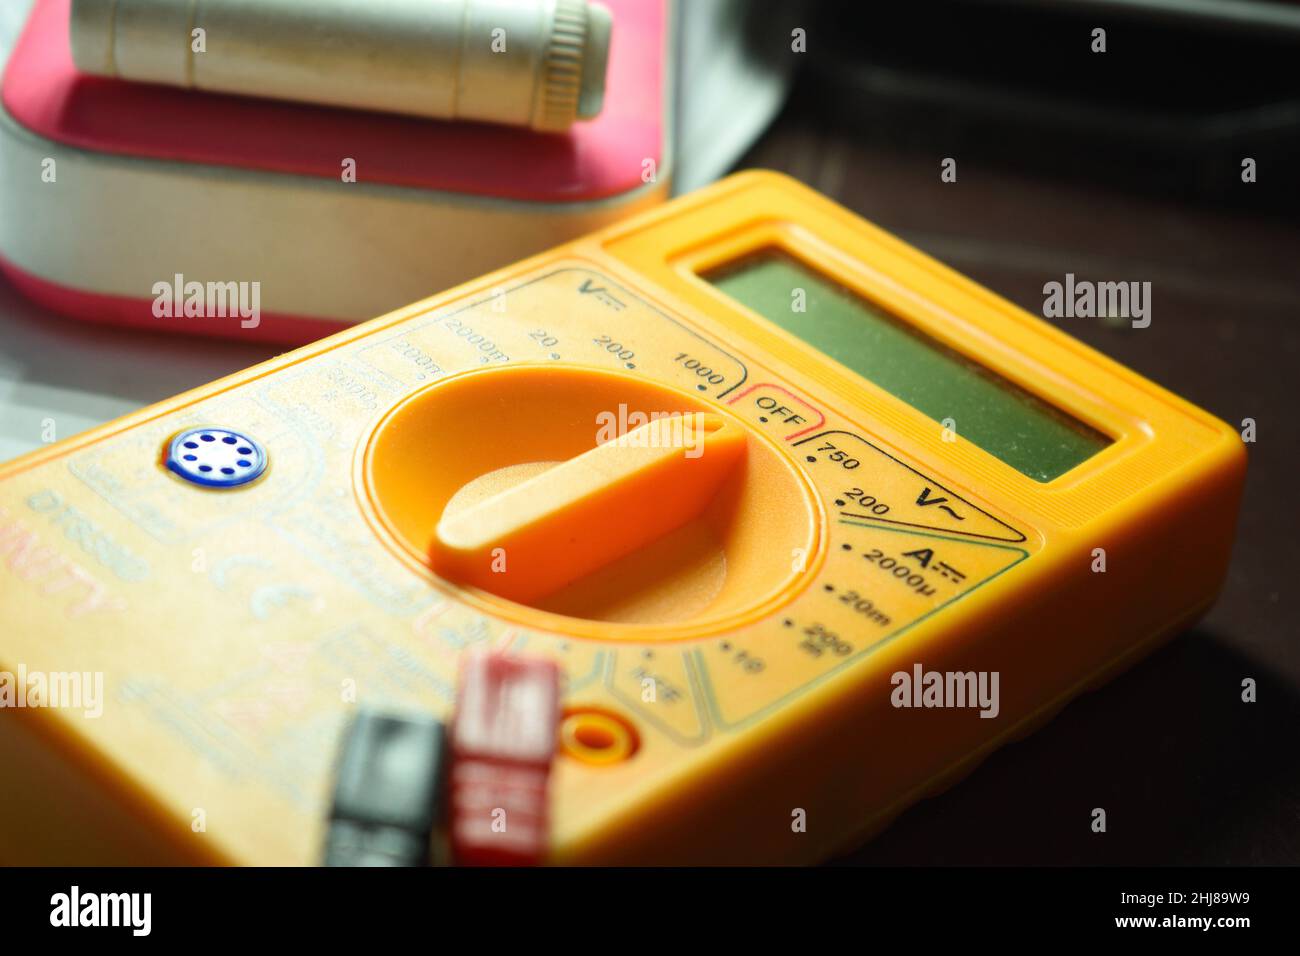 A small digital micrometer. A multimeter is an electronic measuring instrument that combines several measurement functions in one unit. Stock Photo